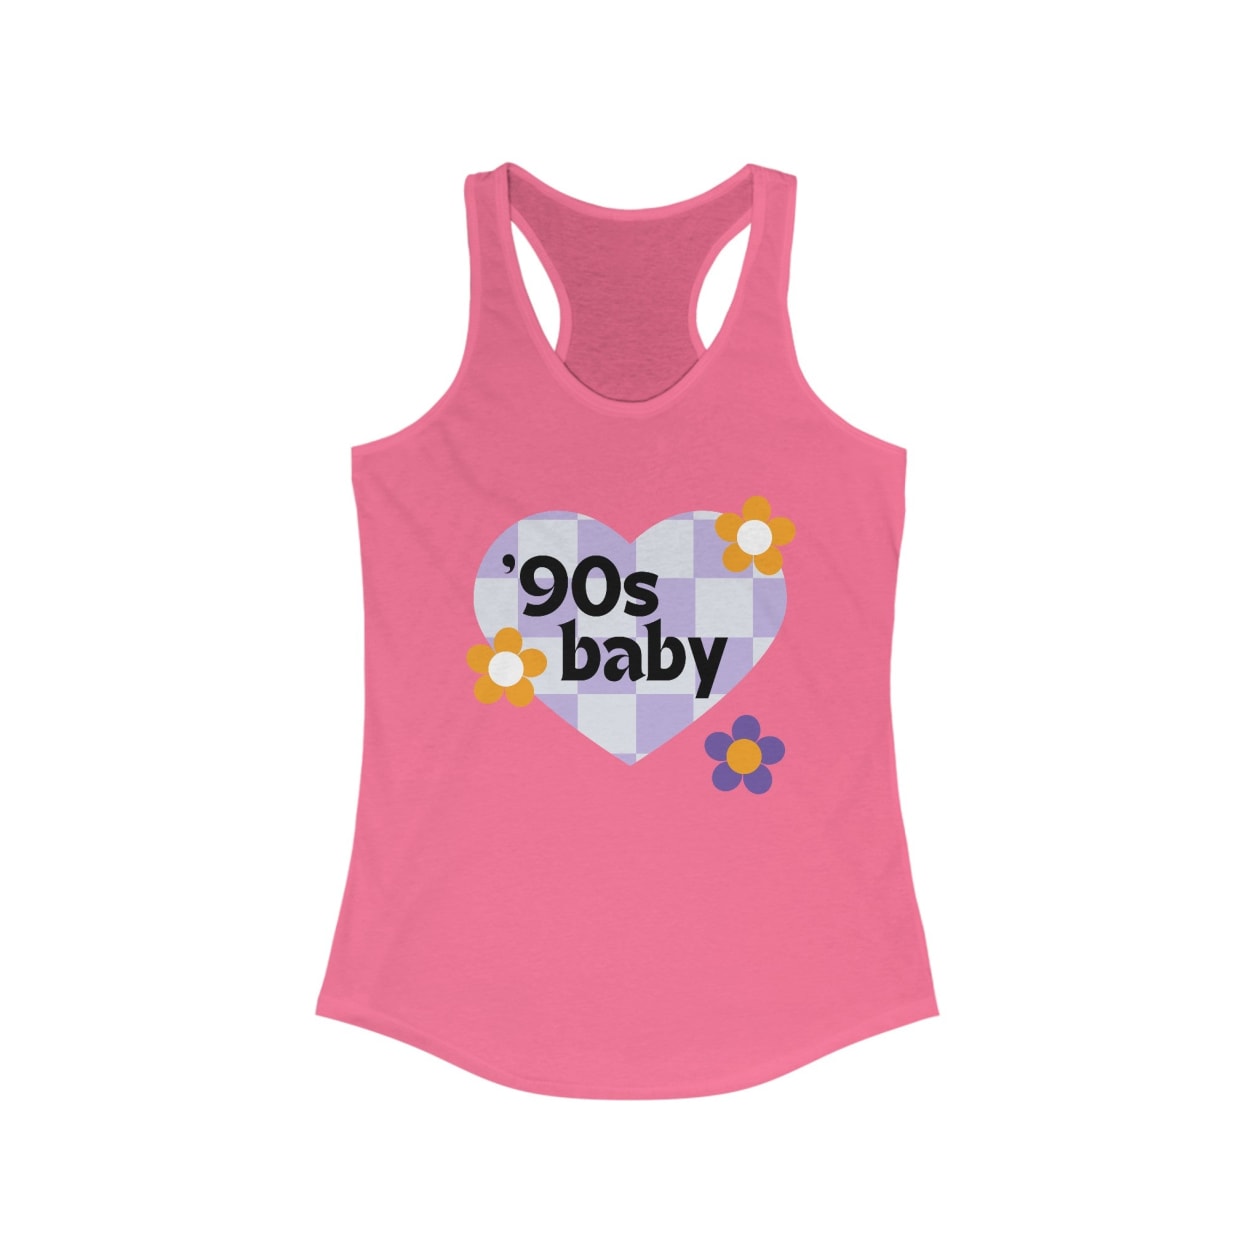 90's Baby Women's Ideal Racerback Tank - Color: Solid Hot Pink, Size: XS